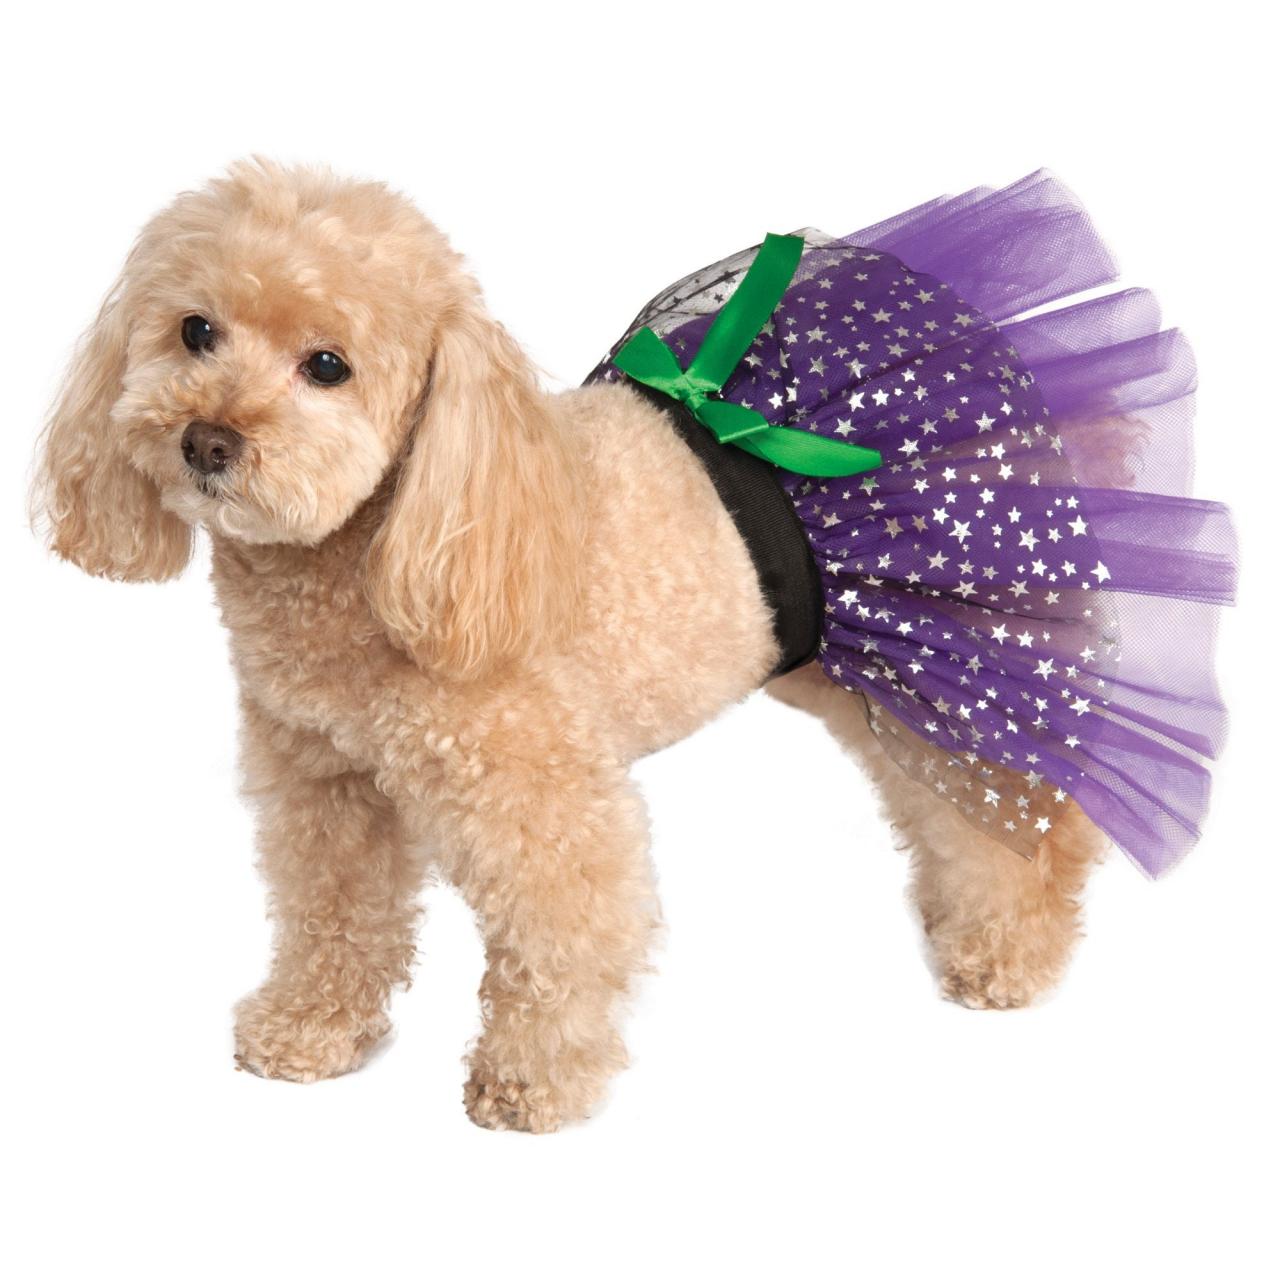 Mardi Gras Pet Jester Collar Or Tutu Skirt For Dog Or Cat Parade Costume Fat Tuesday Purple Green Gold